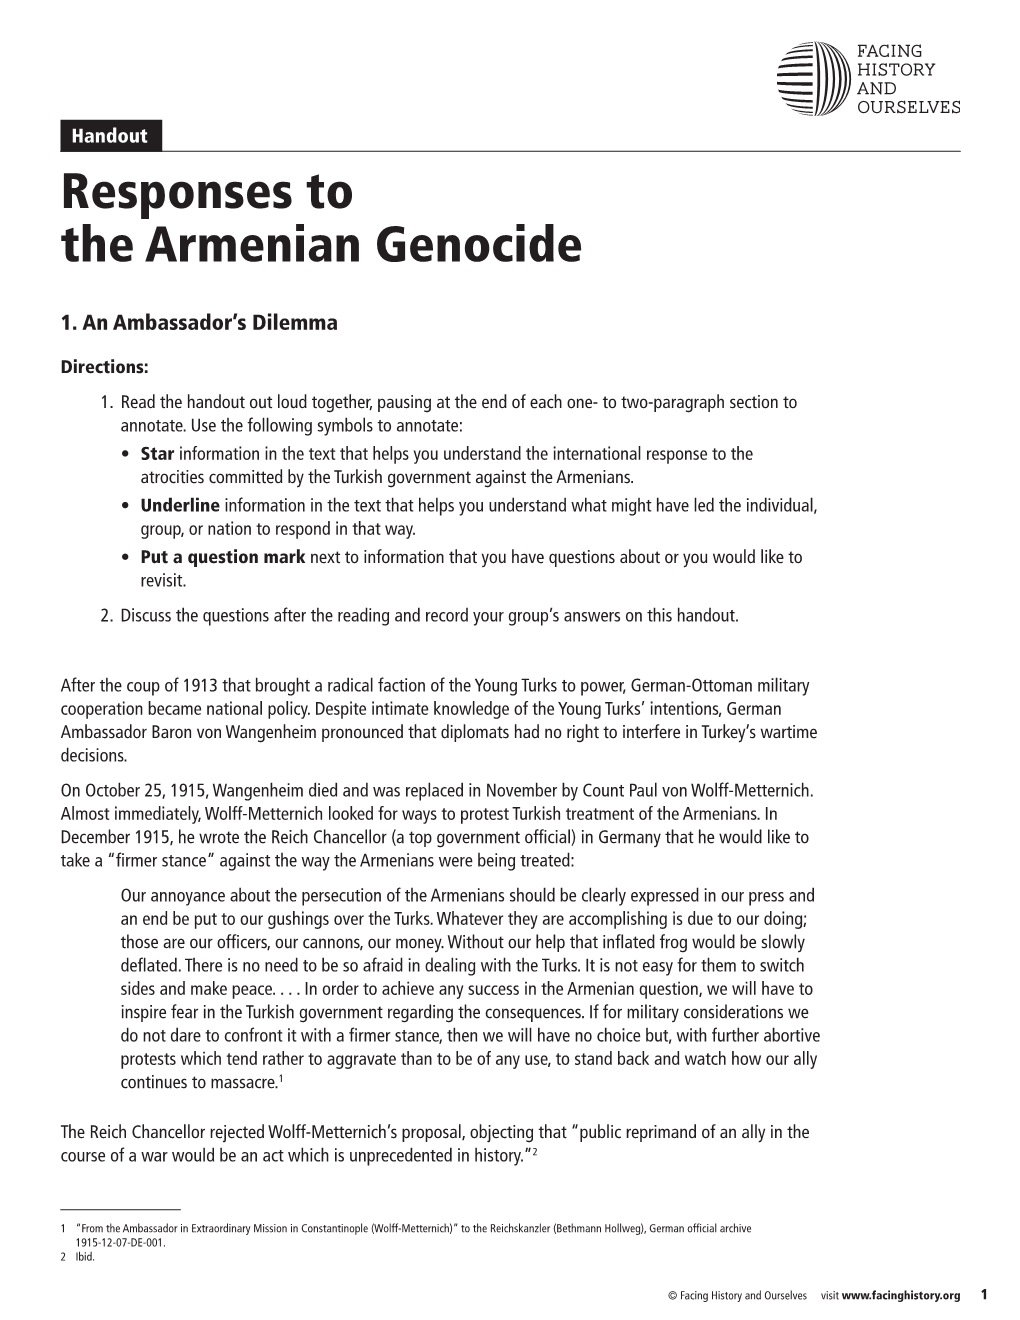 Responses to the Armenian Genocide